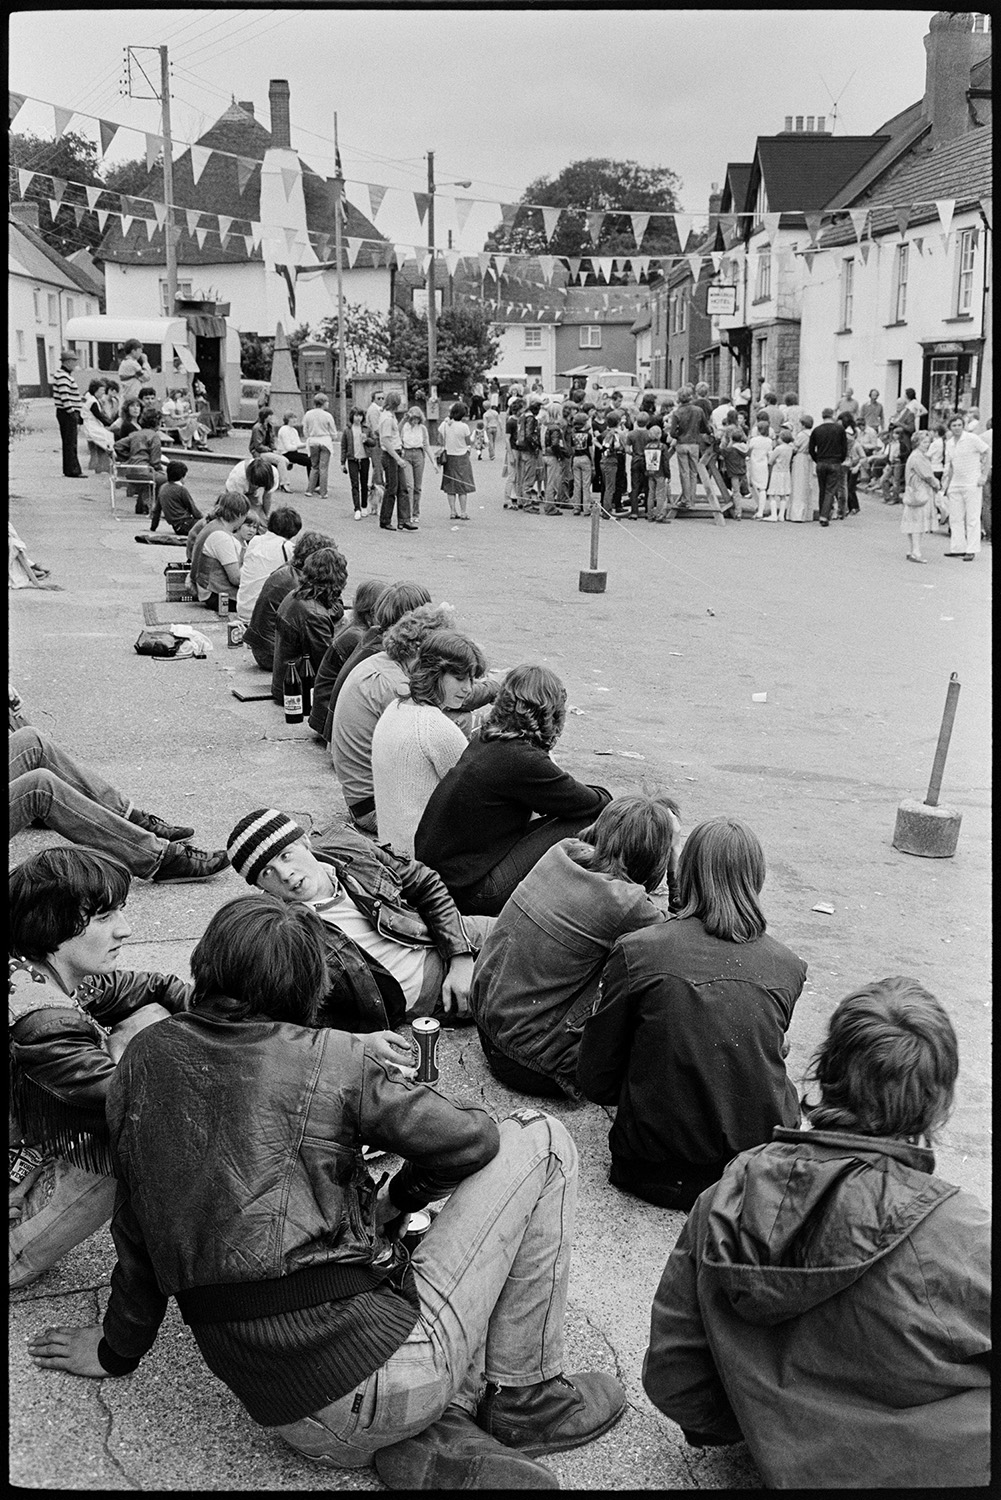 People waiting for fair, cat, pavement artists, Morris Dance.
[Young people, including teenagers in leather jackets, sitting on a pavement in Winkleigh Square, waiting for Winkleigh Fair to start. Bunting is strung across the square, and a crowd of people gathered further along the street.]